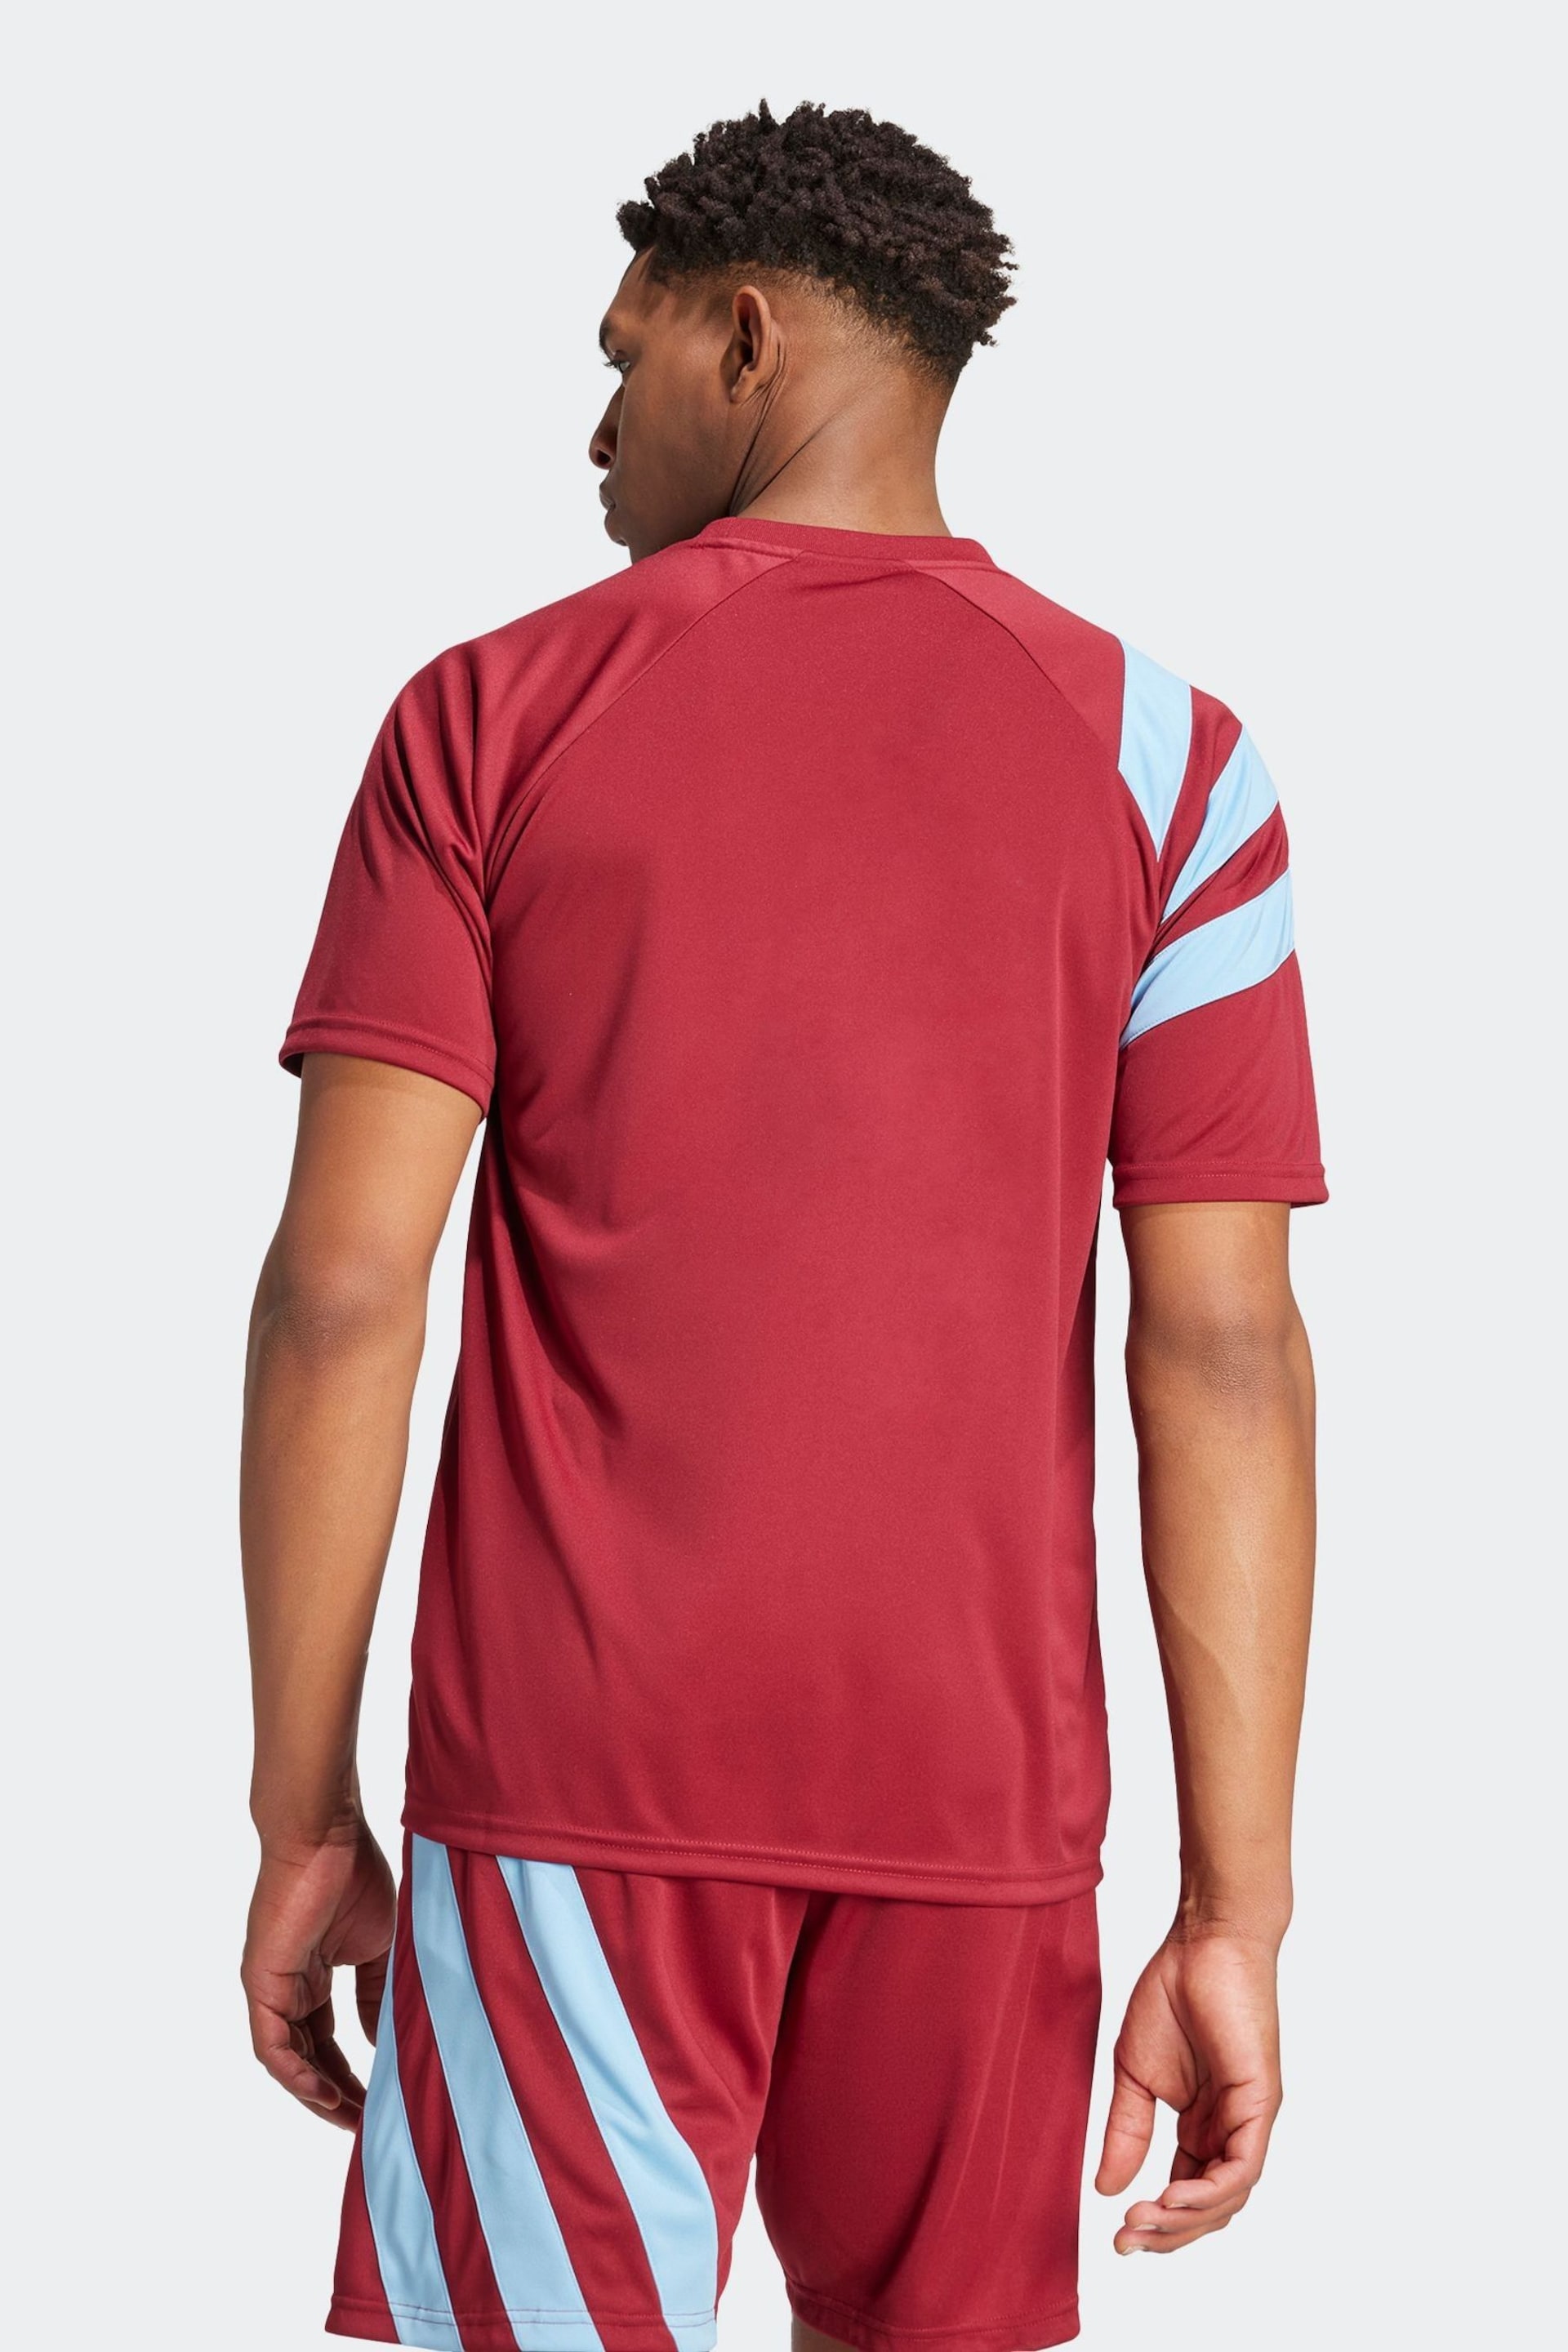 adidas Red/Blue Fortore 23 Jersey - Image 3 of 8